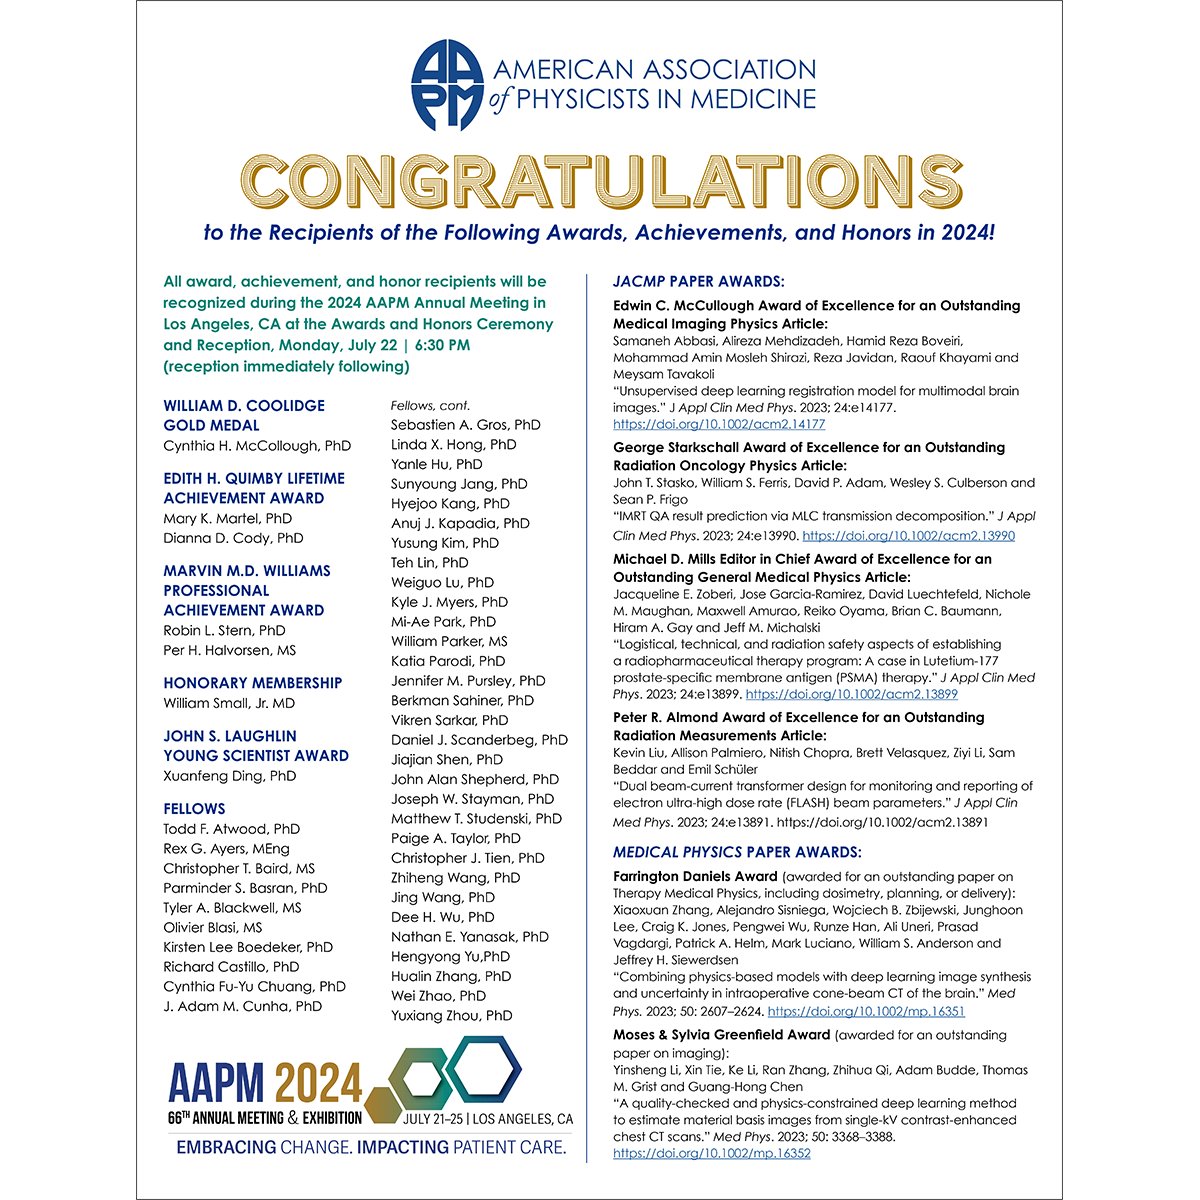 Congratulations to #Purdue #medphys alum Tyler Blackwell (@TylerABlackwell) for being named an AAPM Fellow! @aapmhq #boilermaker